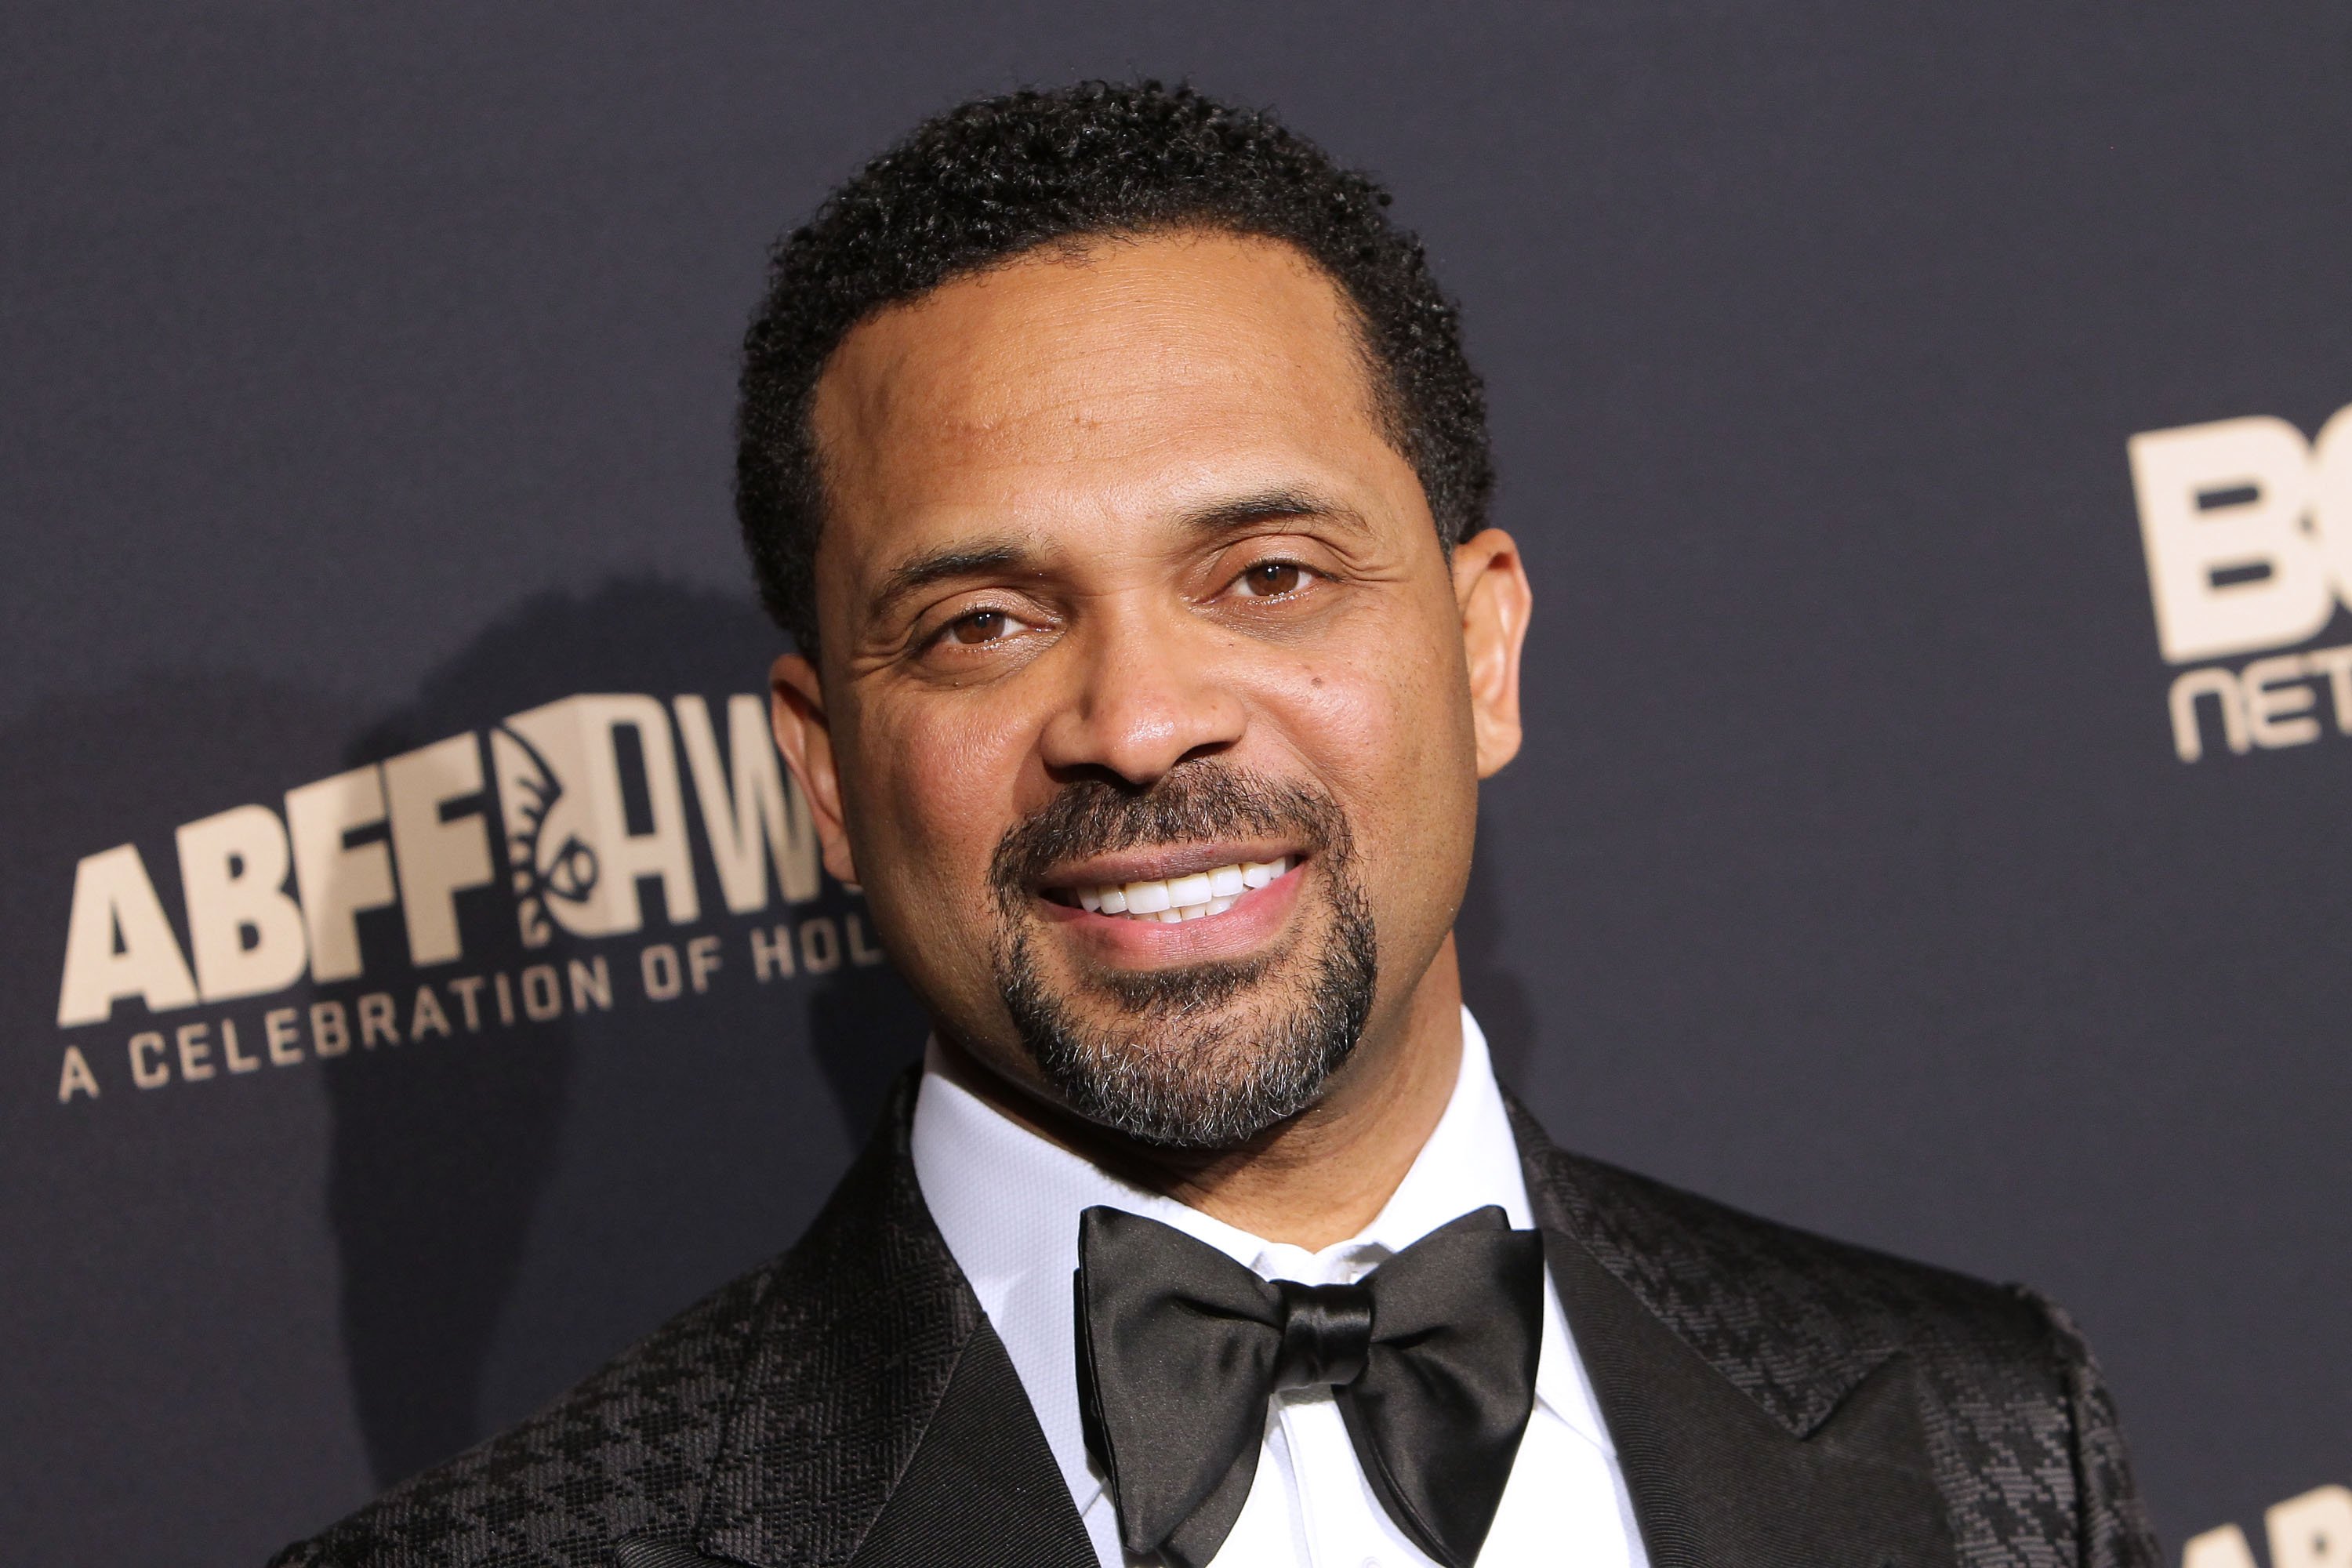 Mike Epps arrived to the 2016 American Black Film Festival Awards Gala - Arrivals at The Beverly Hilton Hotel on February 21, 2016. | Photo: Getty Images